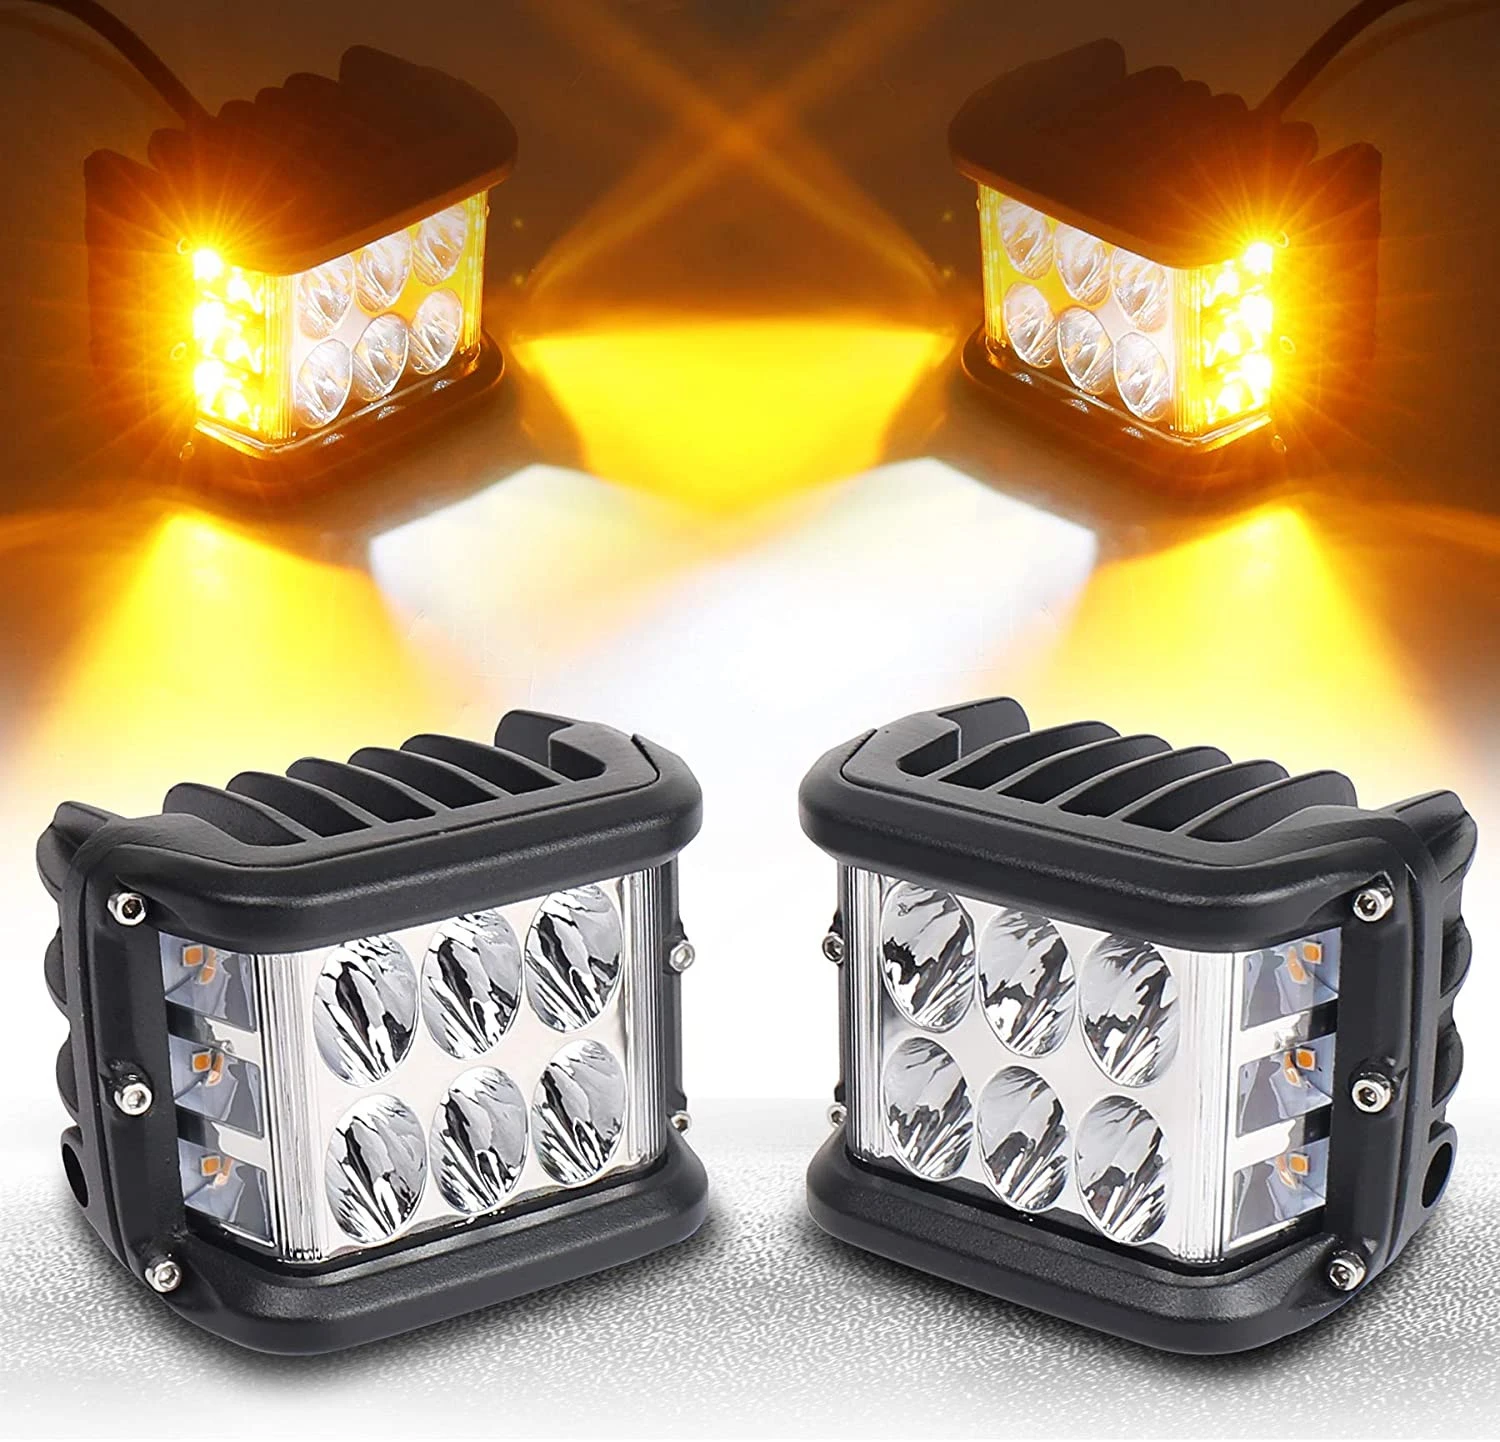 Aluminum square 12v 36watt white and amber color Light Off Road led work light with flash SHOOTING function